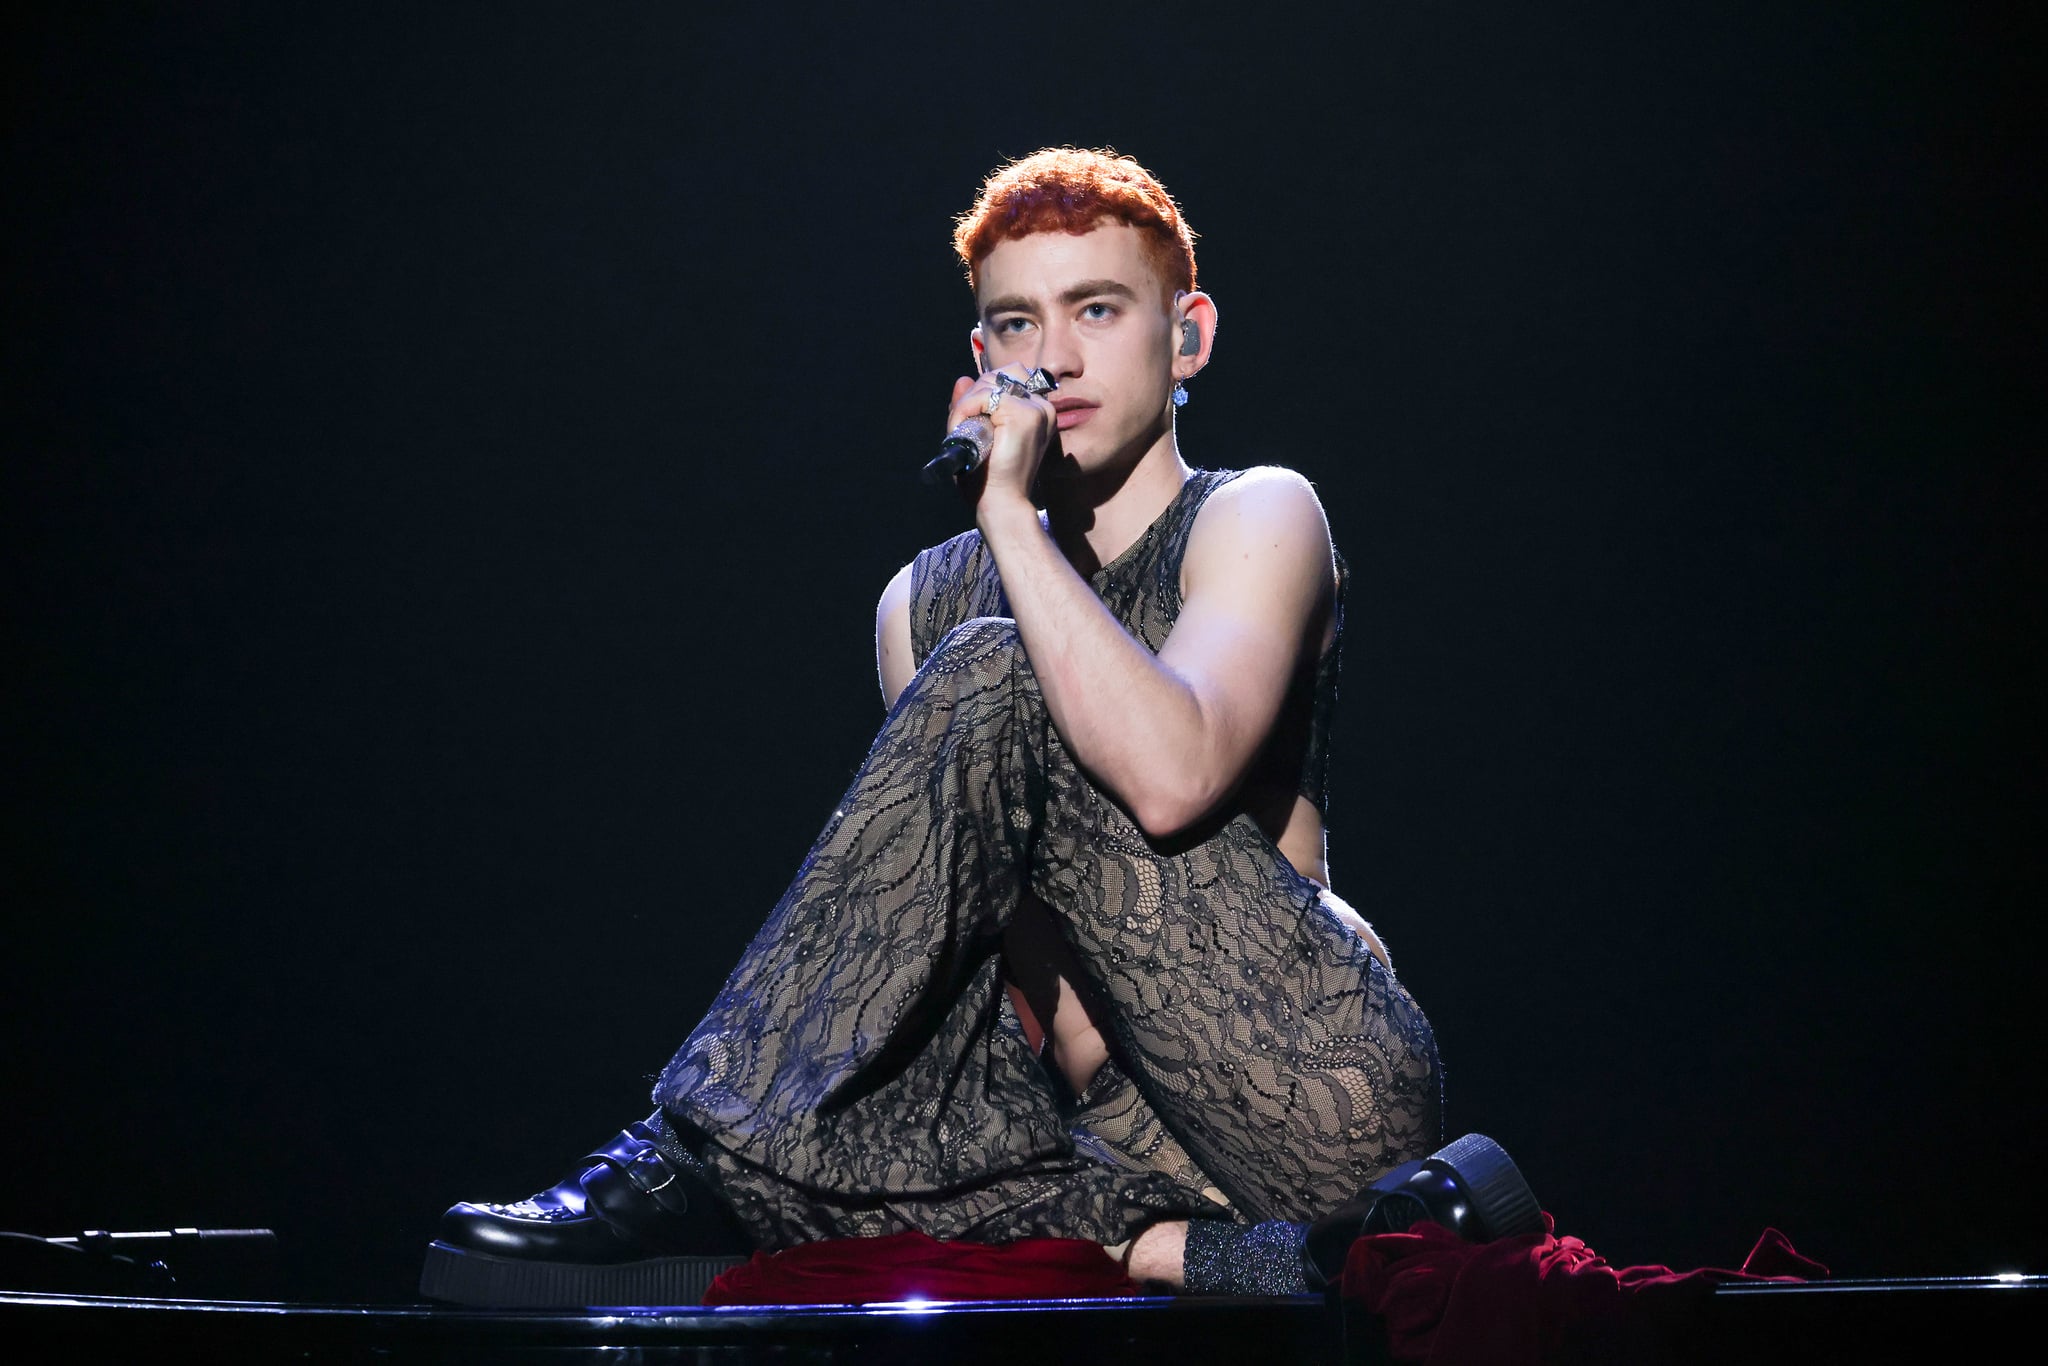 LONDON, ENGLAND - MAY 11: Olly Alexander AKA Years & Years performs at The BRIT Awards 2021 at The O2 Arena on May 11, 2021 in London, England. (Photo by JMEnternational/JMEnternational for BRIT Awards/Getty Images)